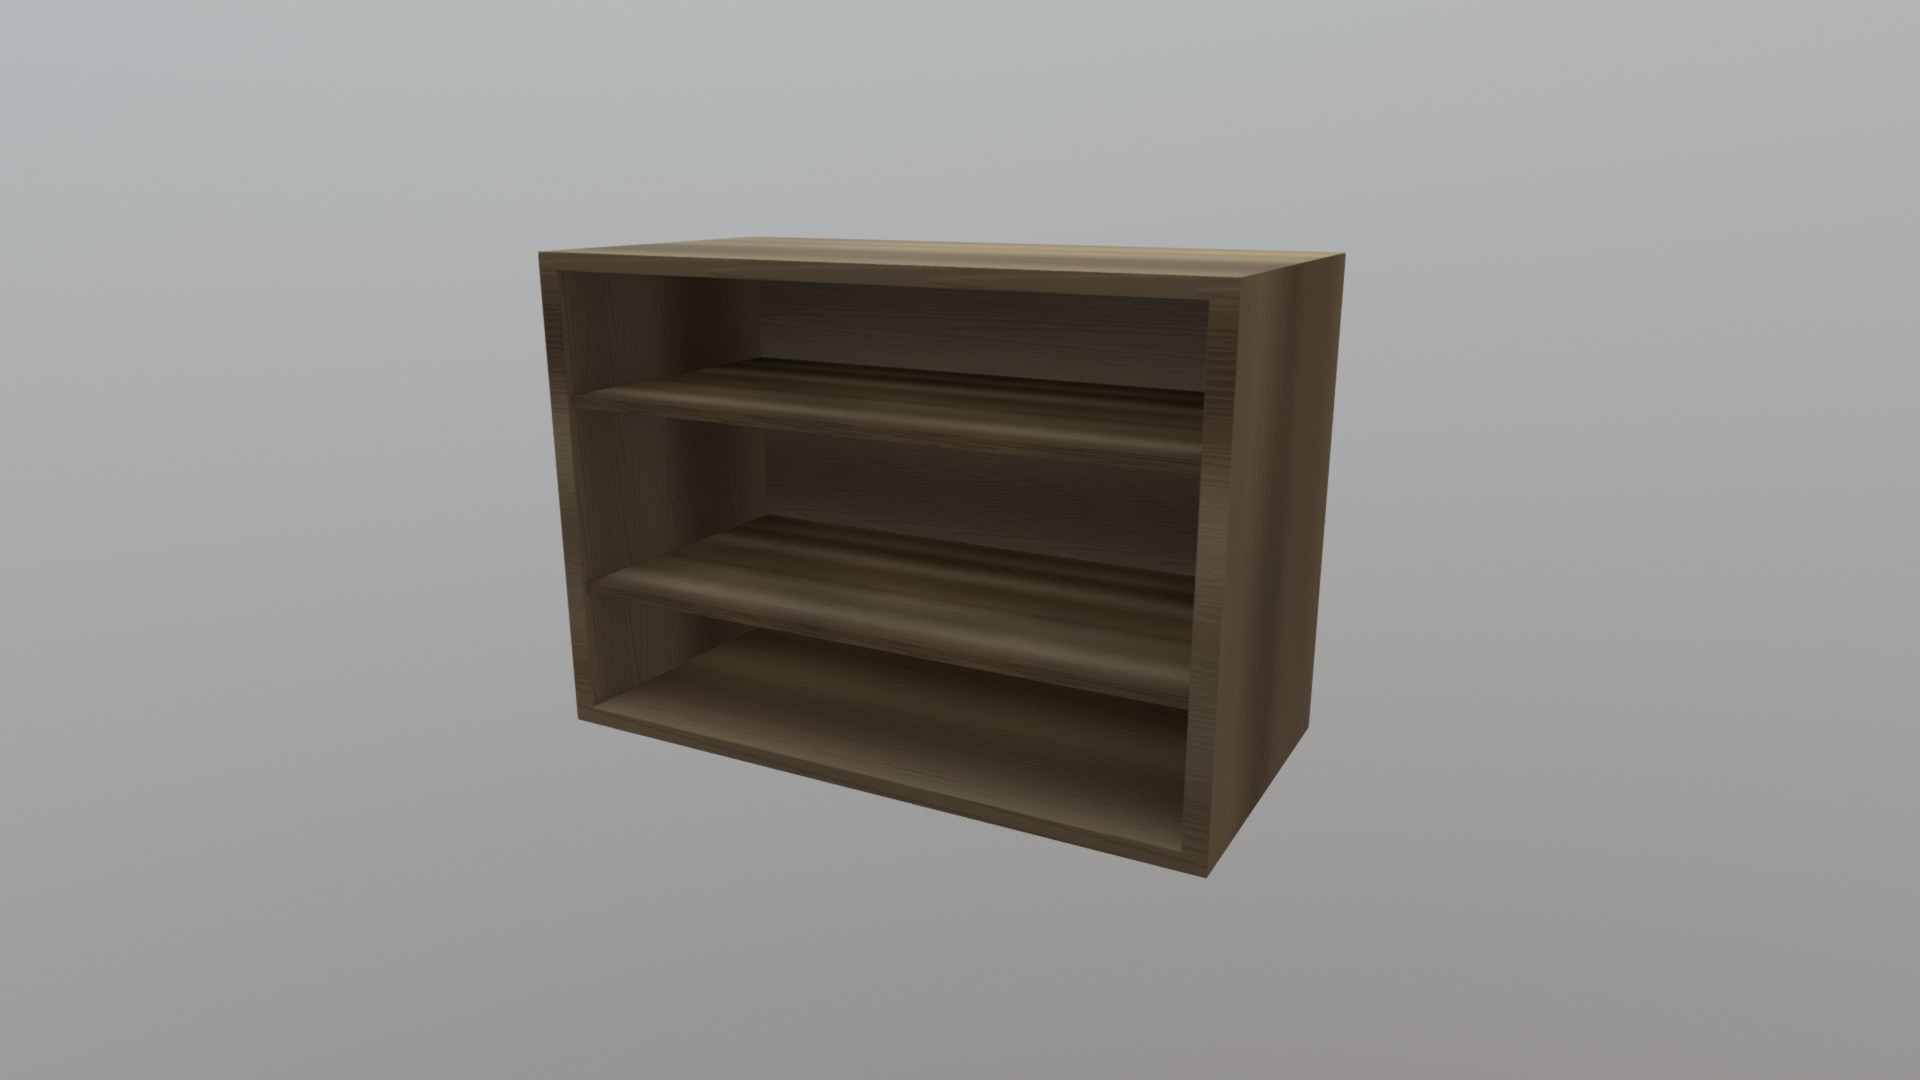 3D model School Classroom Bookshelf - This is a 3D model of the School Classroom Bookshelf. The 3D model is about a wooden shelf on a wall.